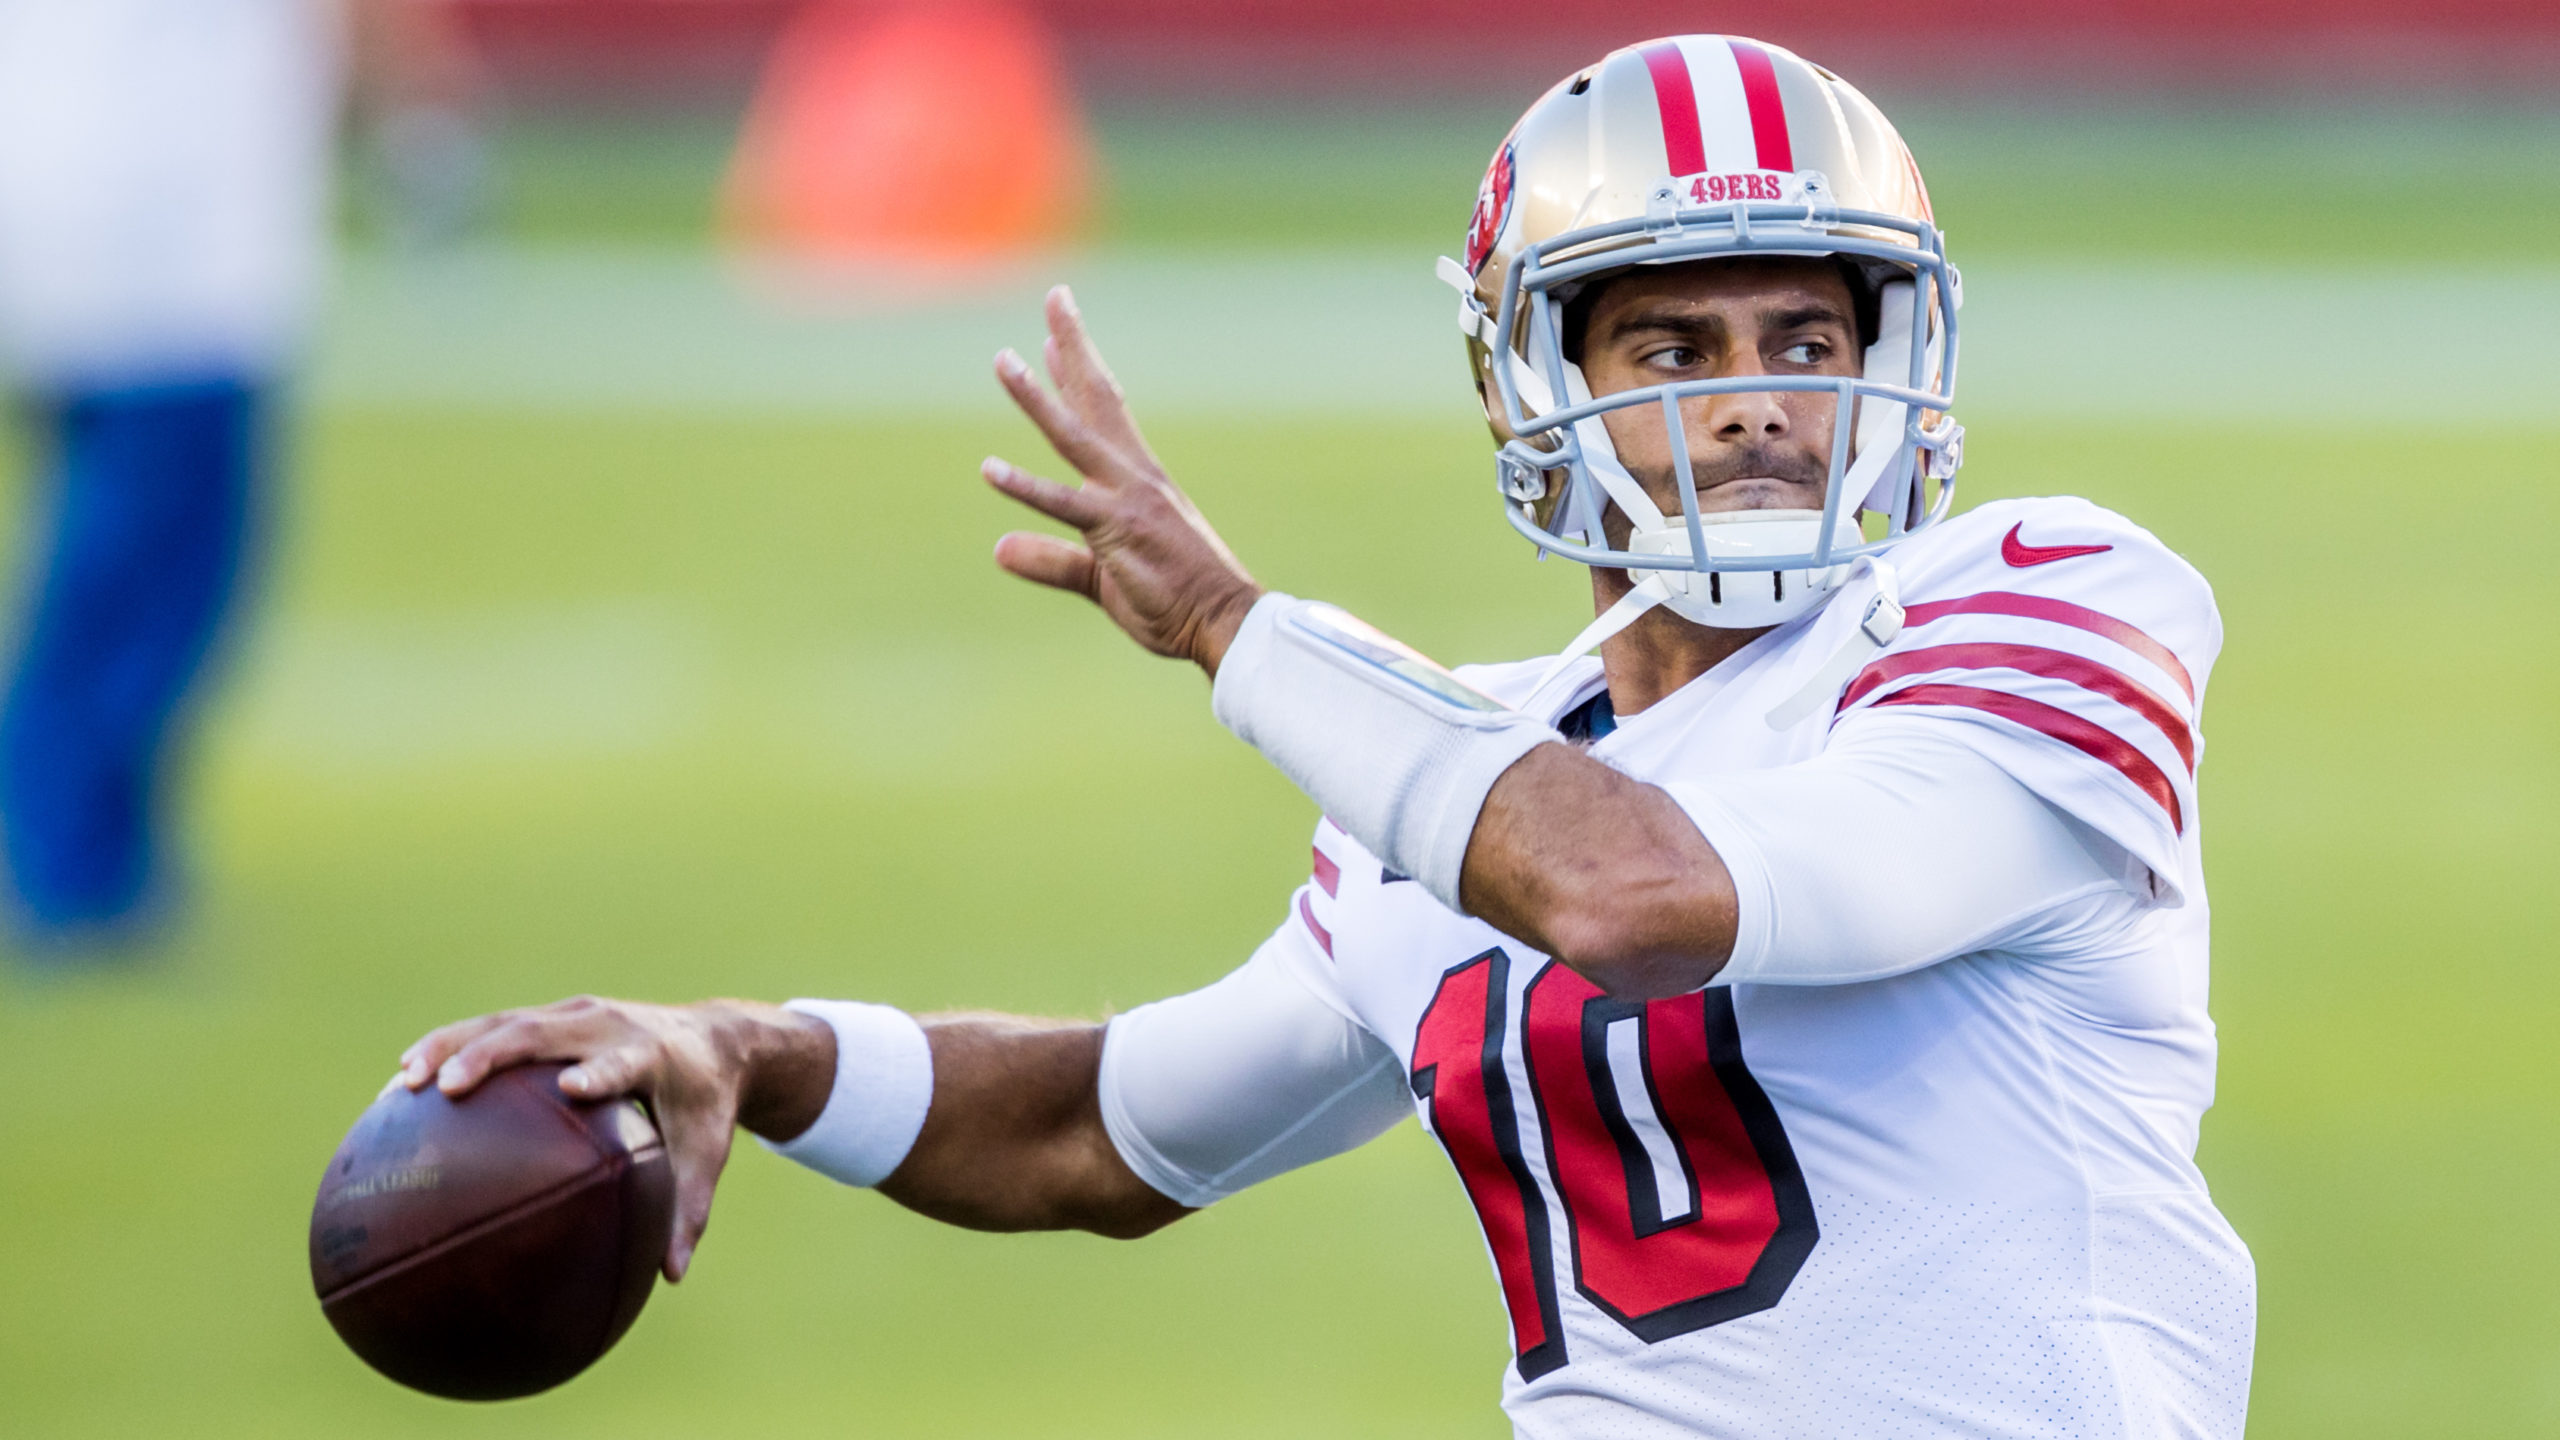 lookahead-waiver-wire-targets-pick-up-jimmy-garoppolo-jaret-patterson-week-7-future-payoff